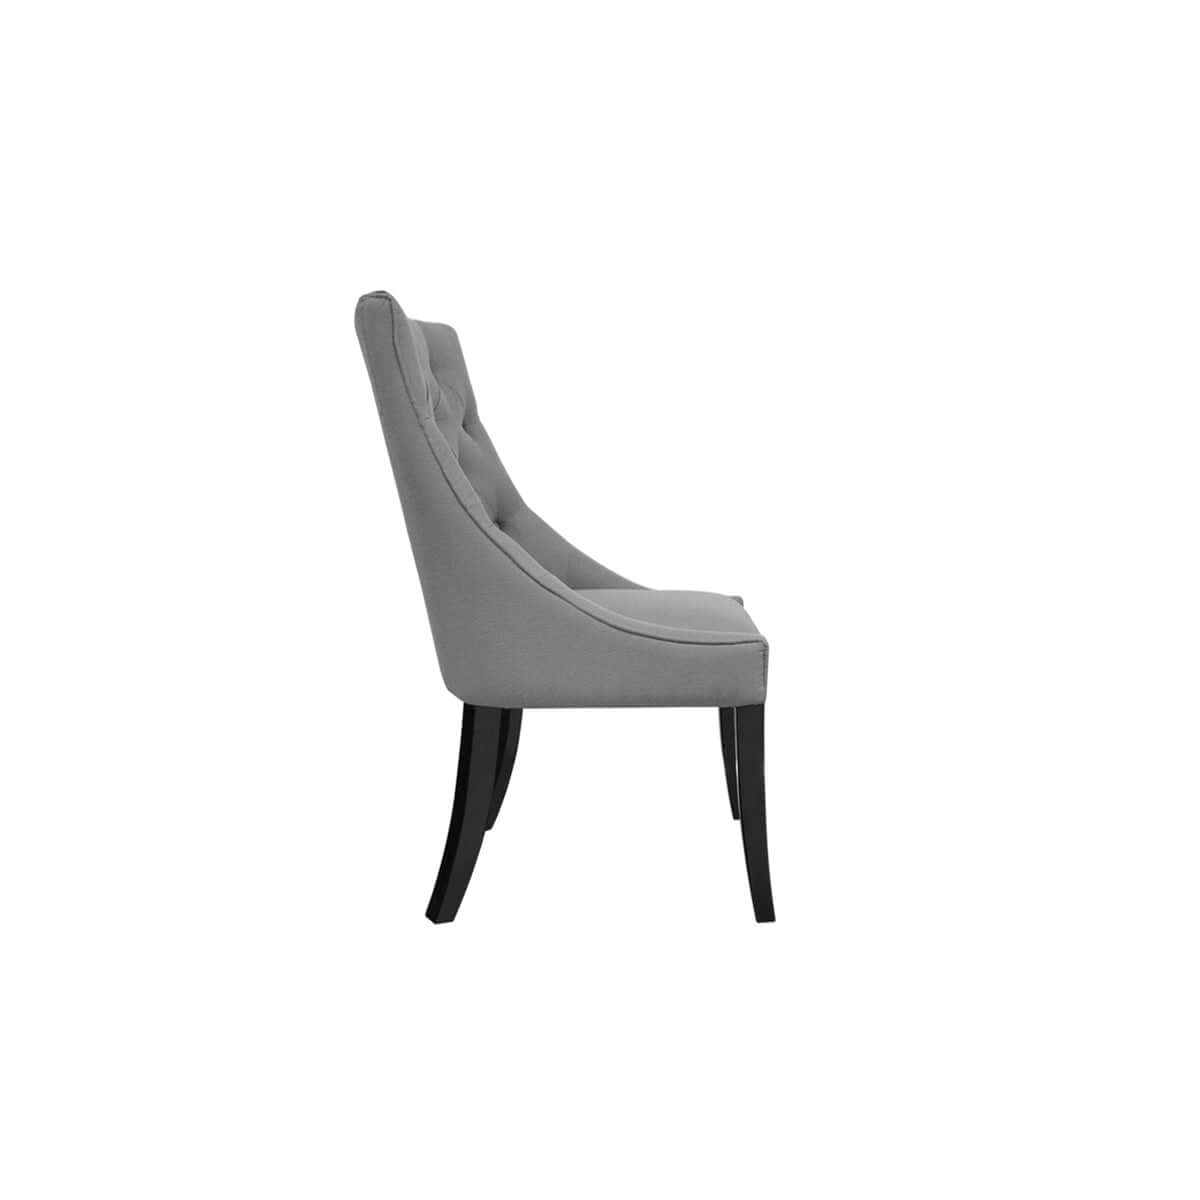 tufted dining chair made in jakarta - side view